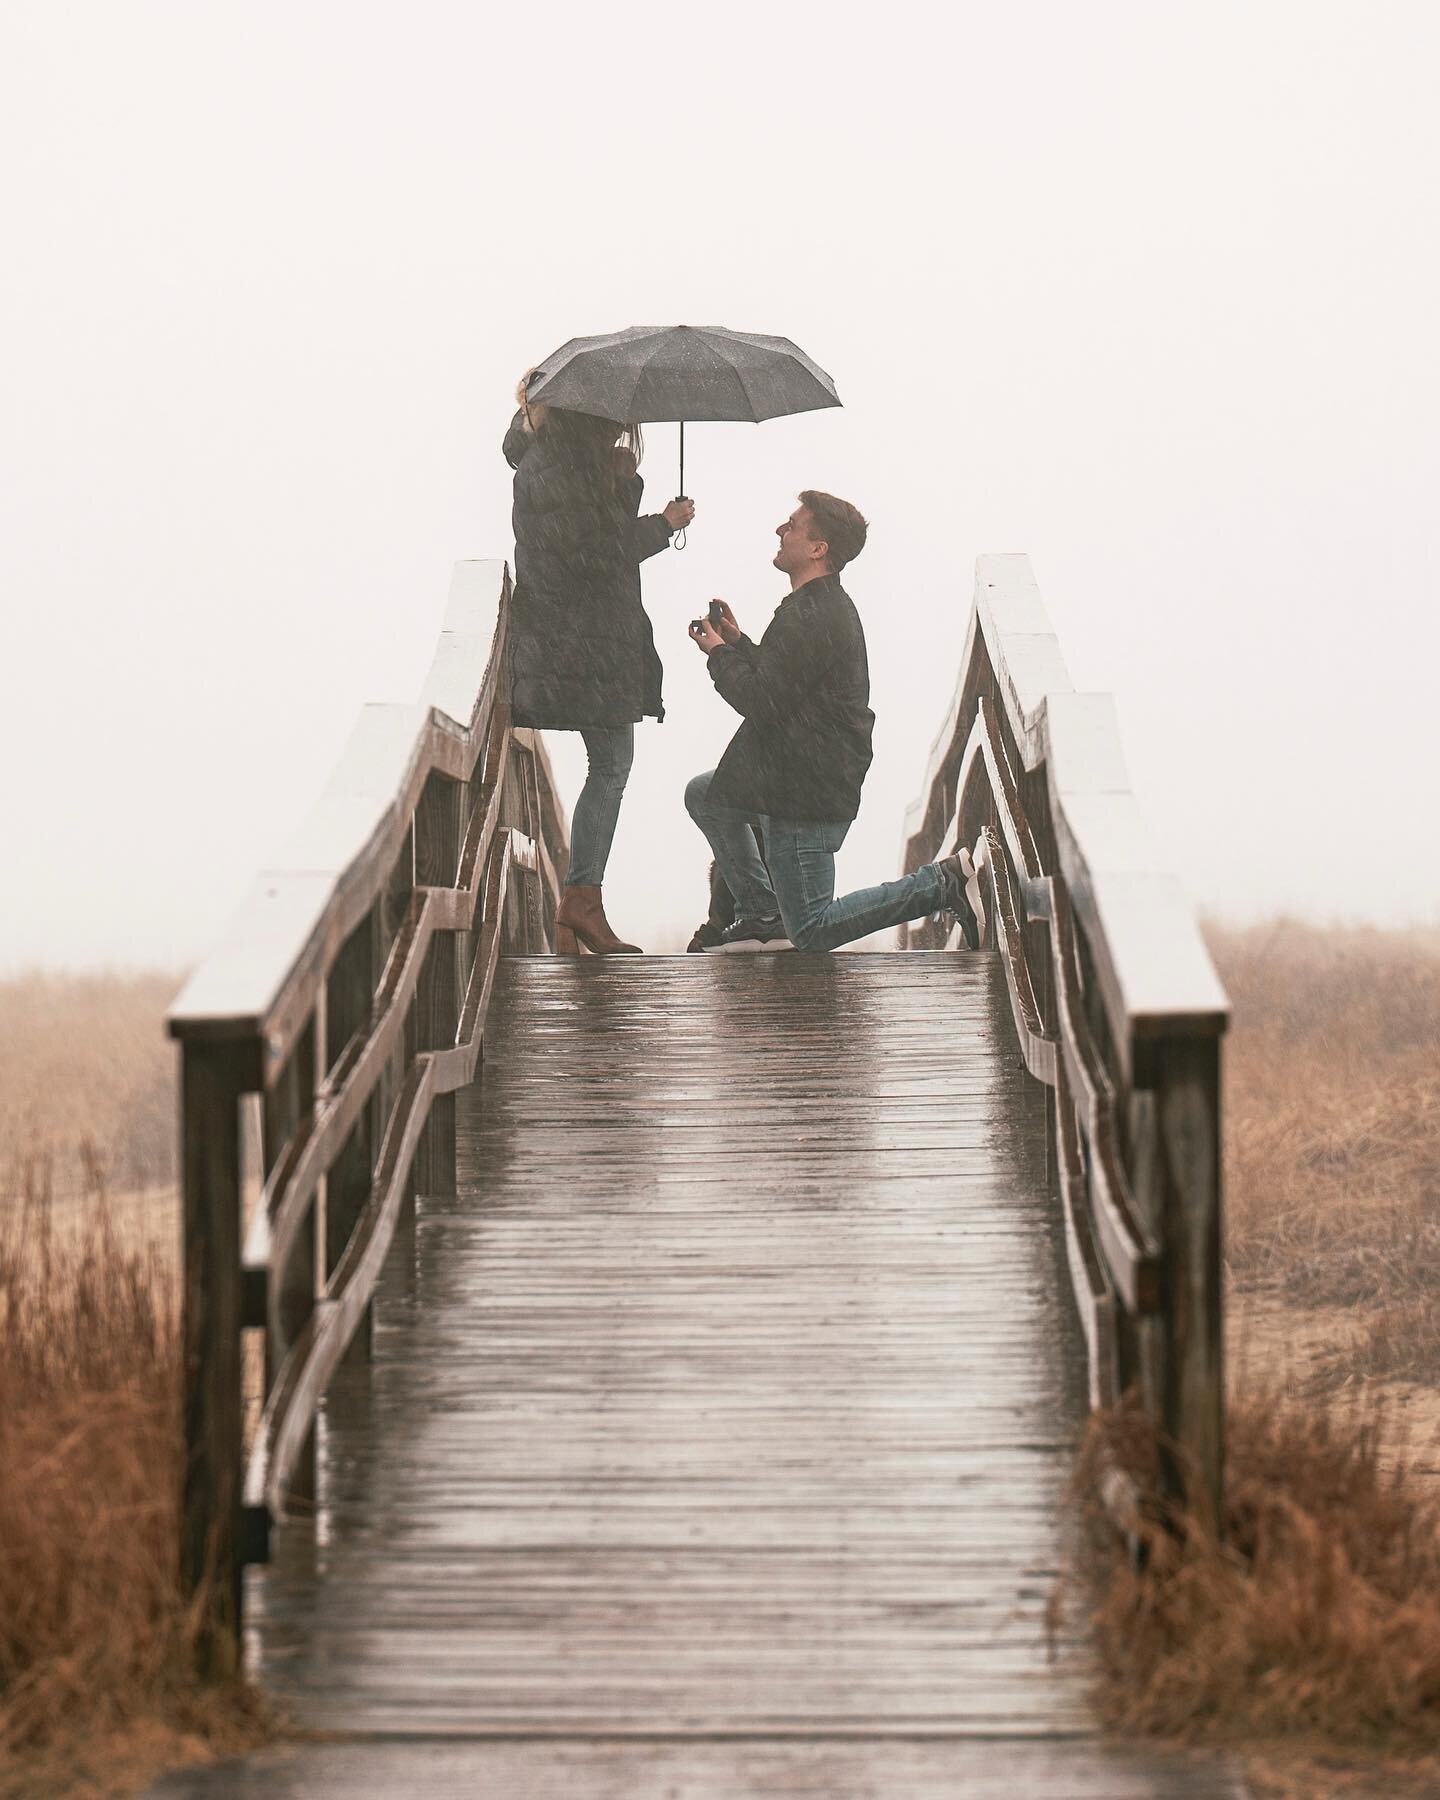 A real life Notebook moment right here ☔️💍🤍

If you&rsquo;ve ever shot a proposal before, is your adrenaline pumping like crazy during it or is that just me? For this one, it was down-pouring and you could cut the fog with a knife. But that&rsquo;s